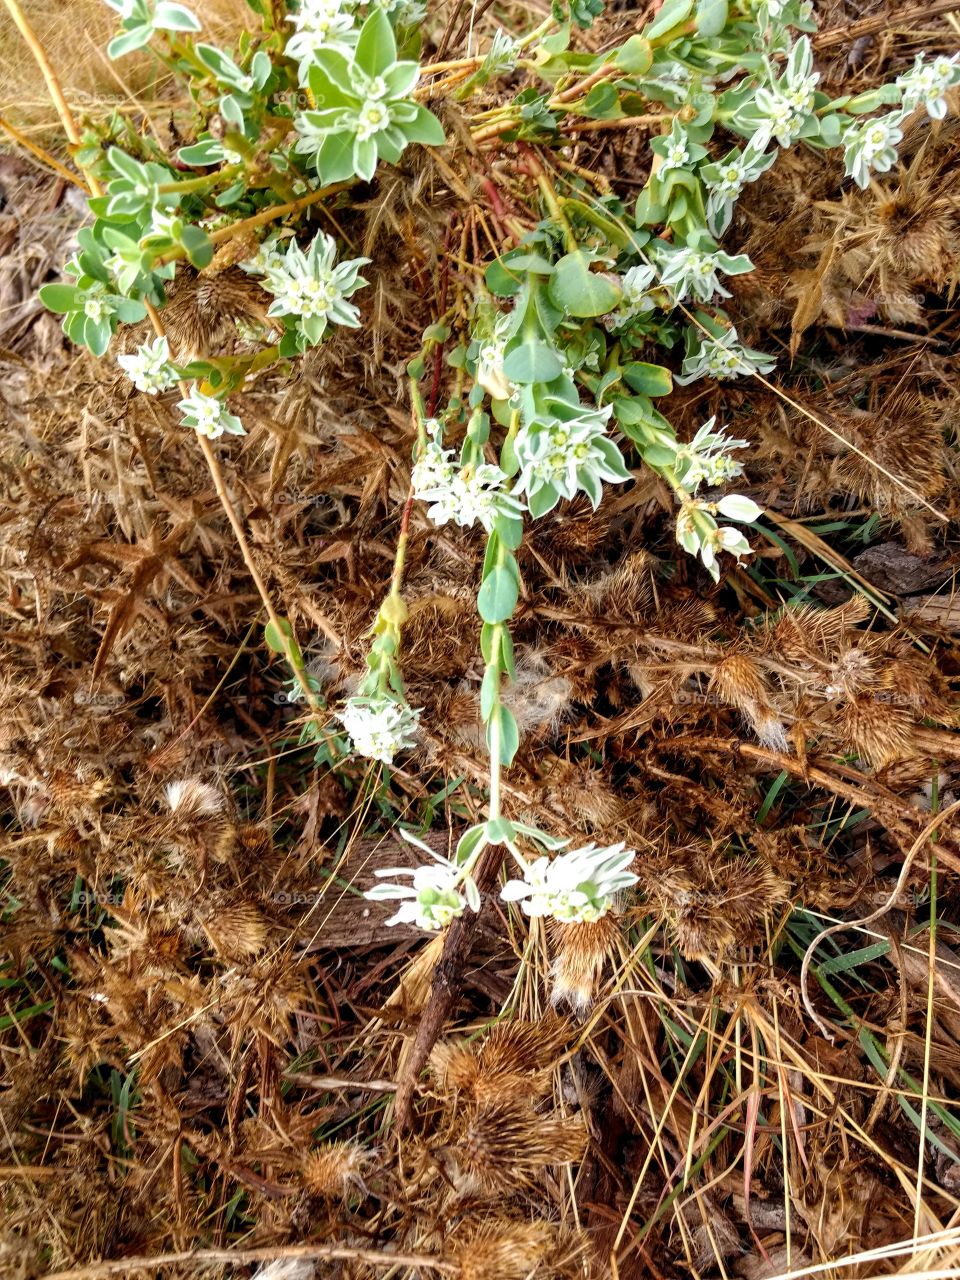 Hardy plant growing during a drought, green white brown, grass, weed, flower, thriving, tough, hopeful